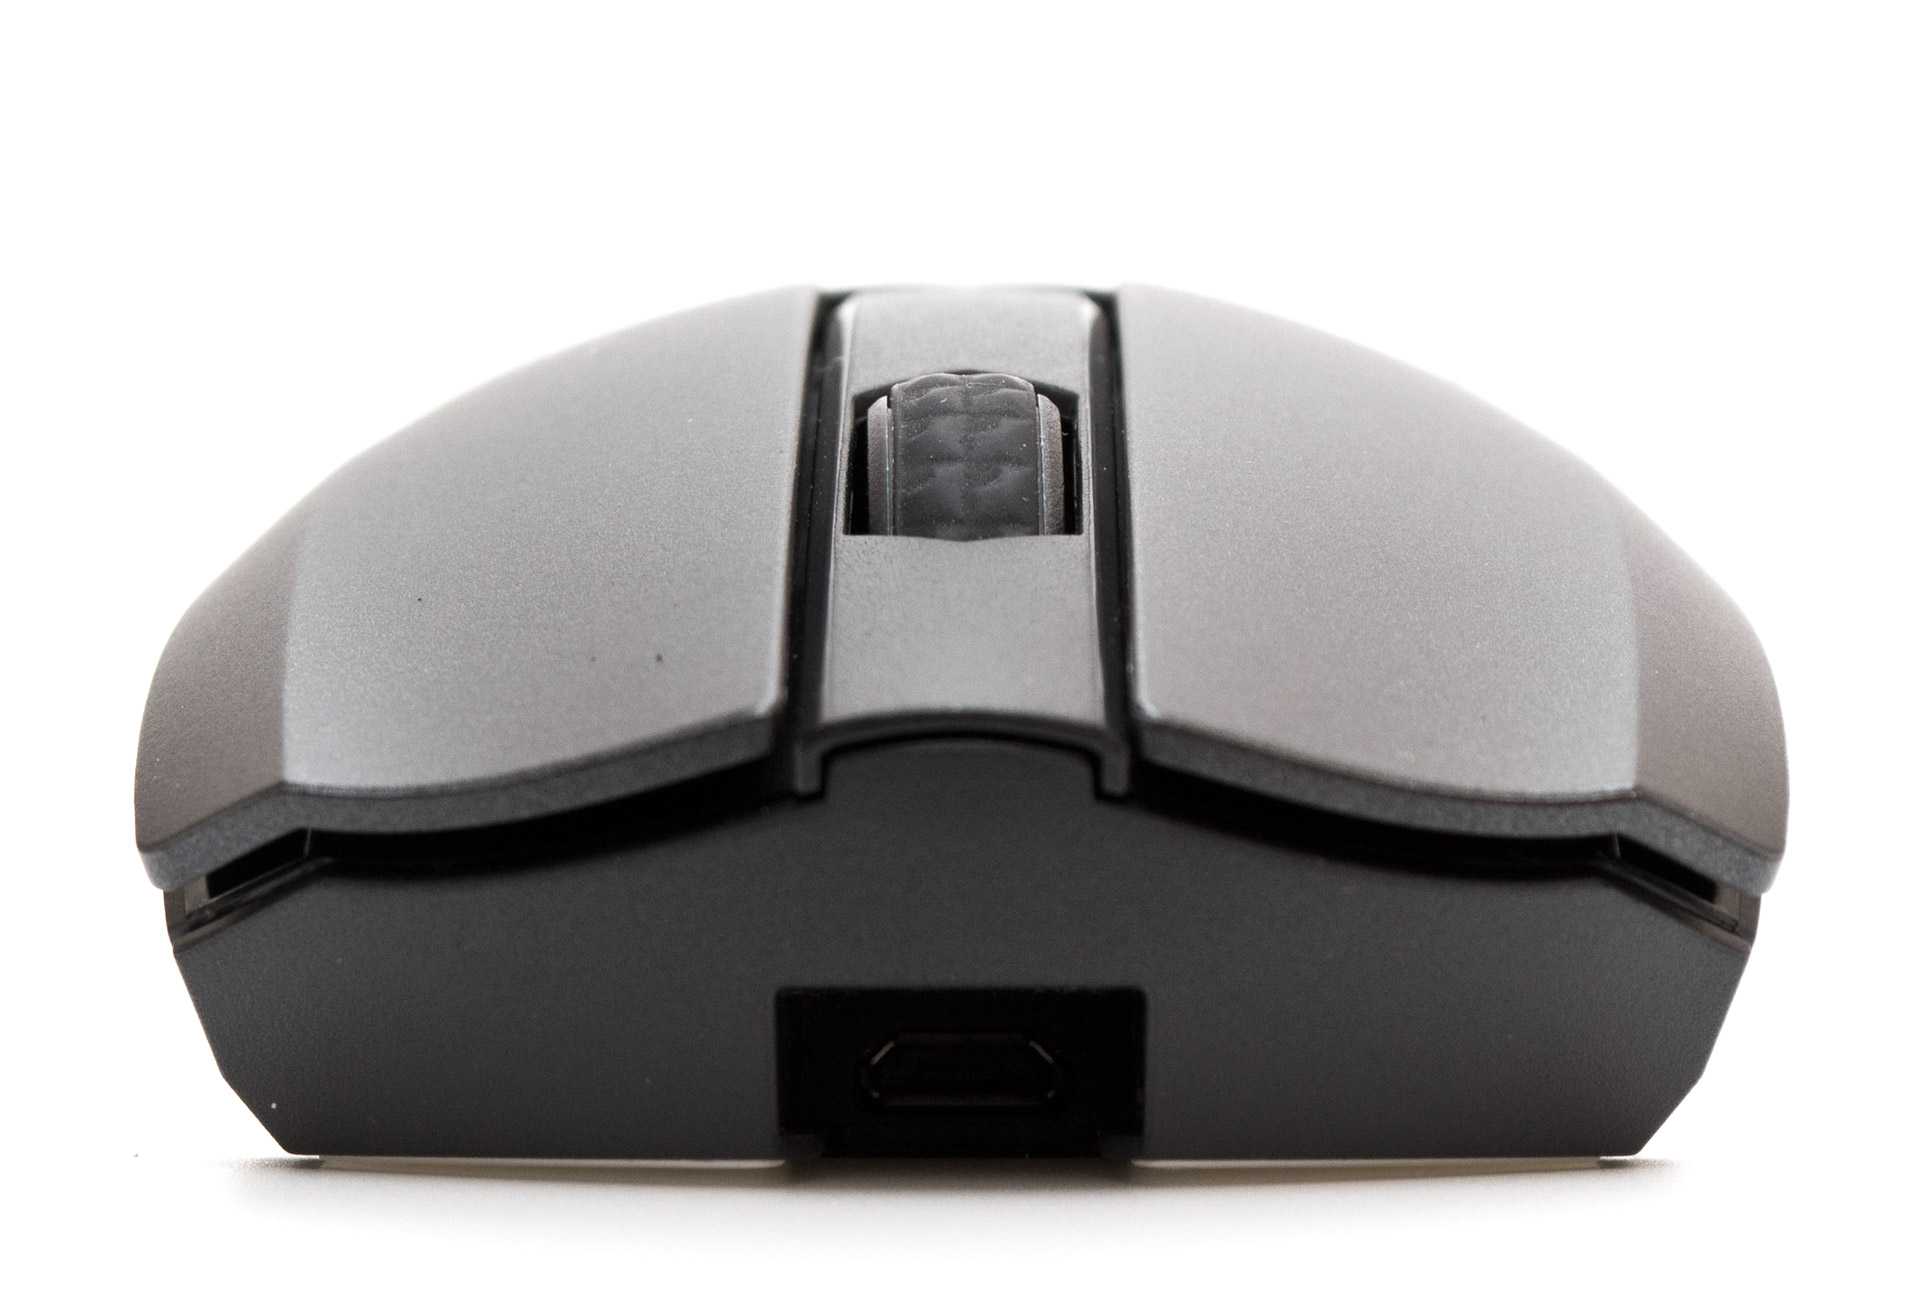 Msi clutch gm41 lightweight wireless gaming mouse review: straight fire | tom's hardware